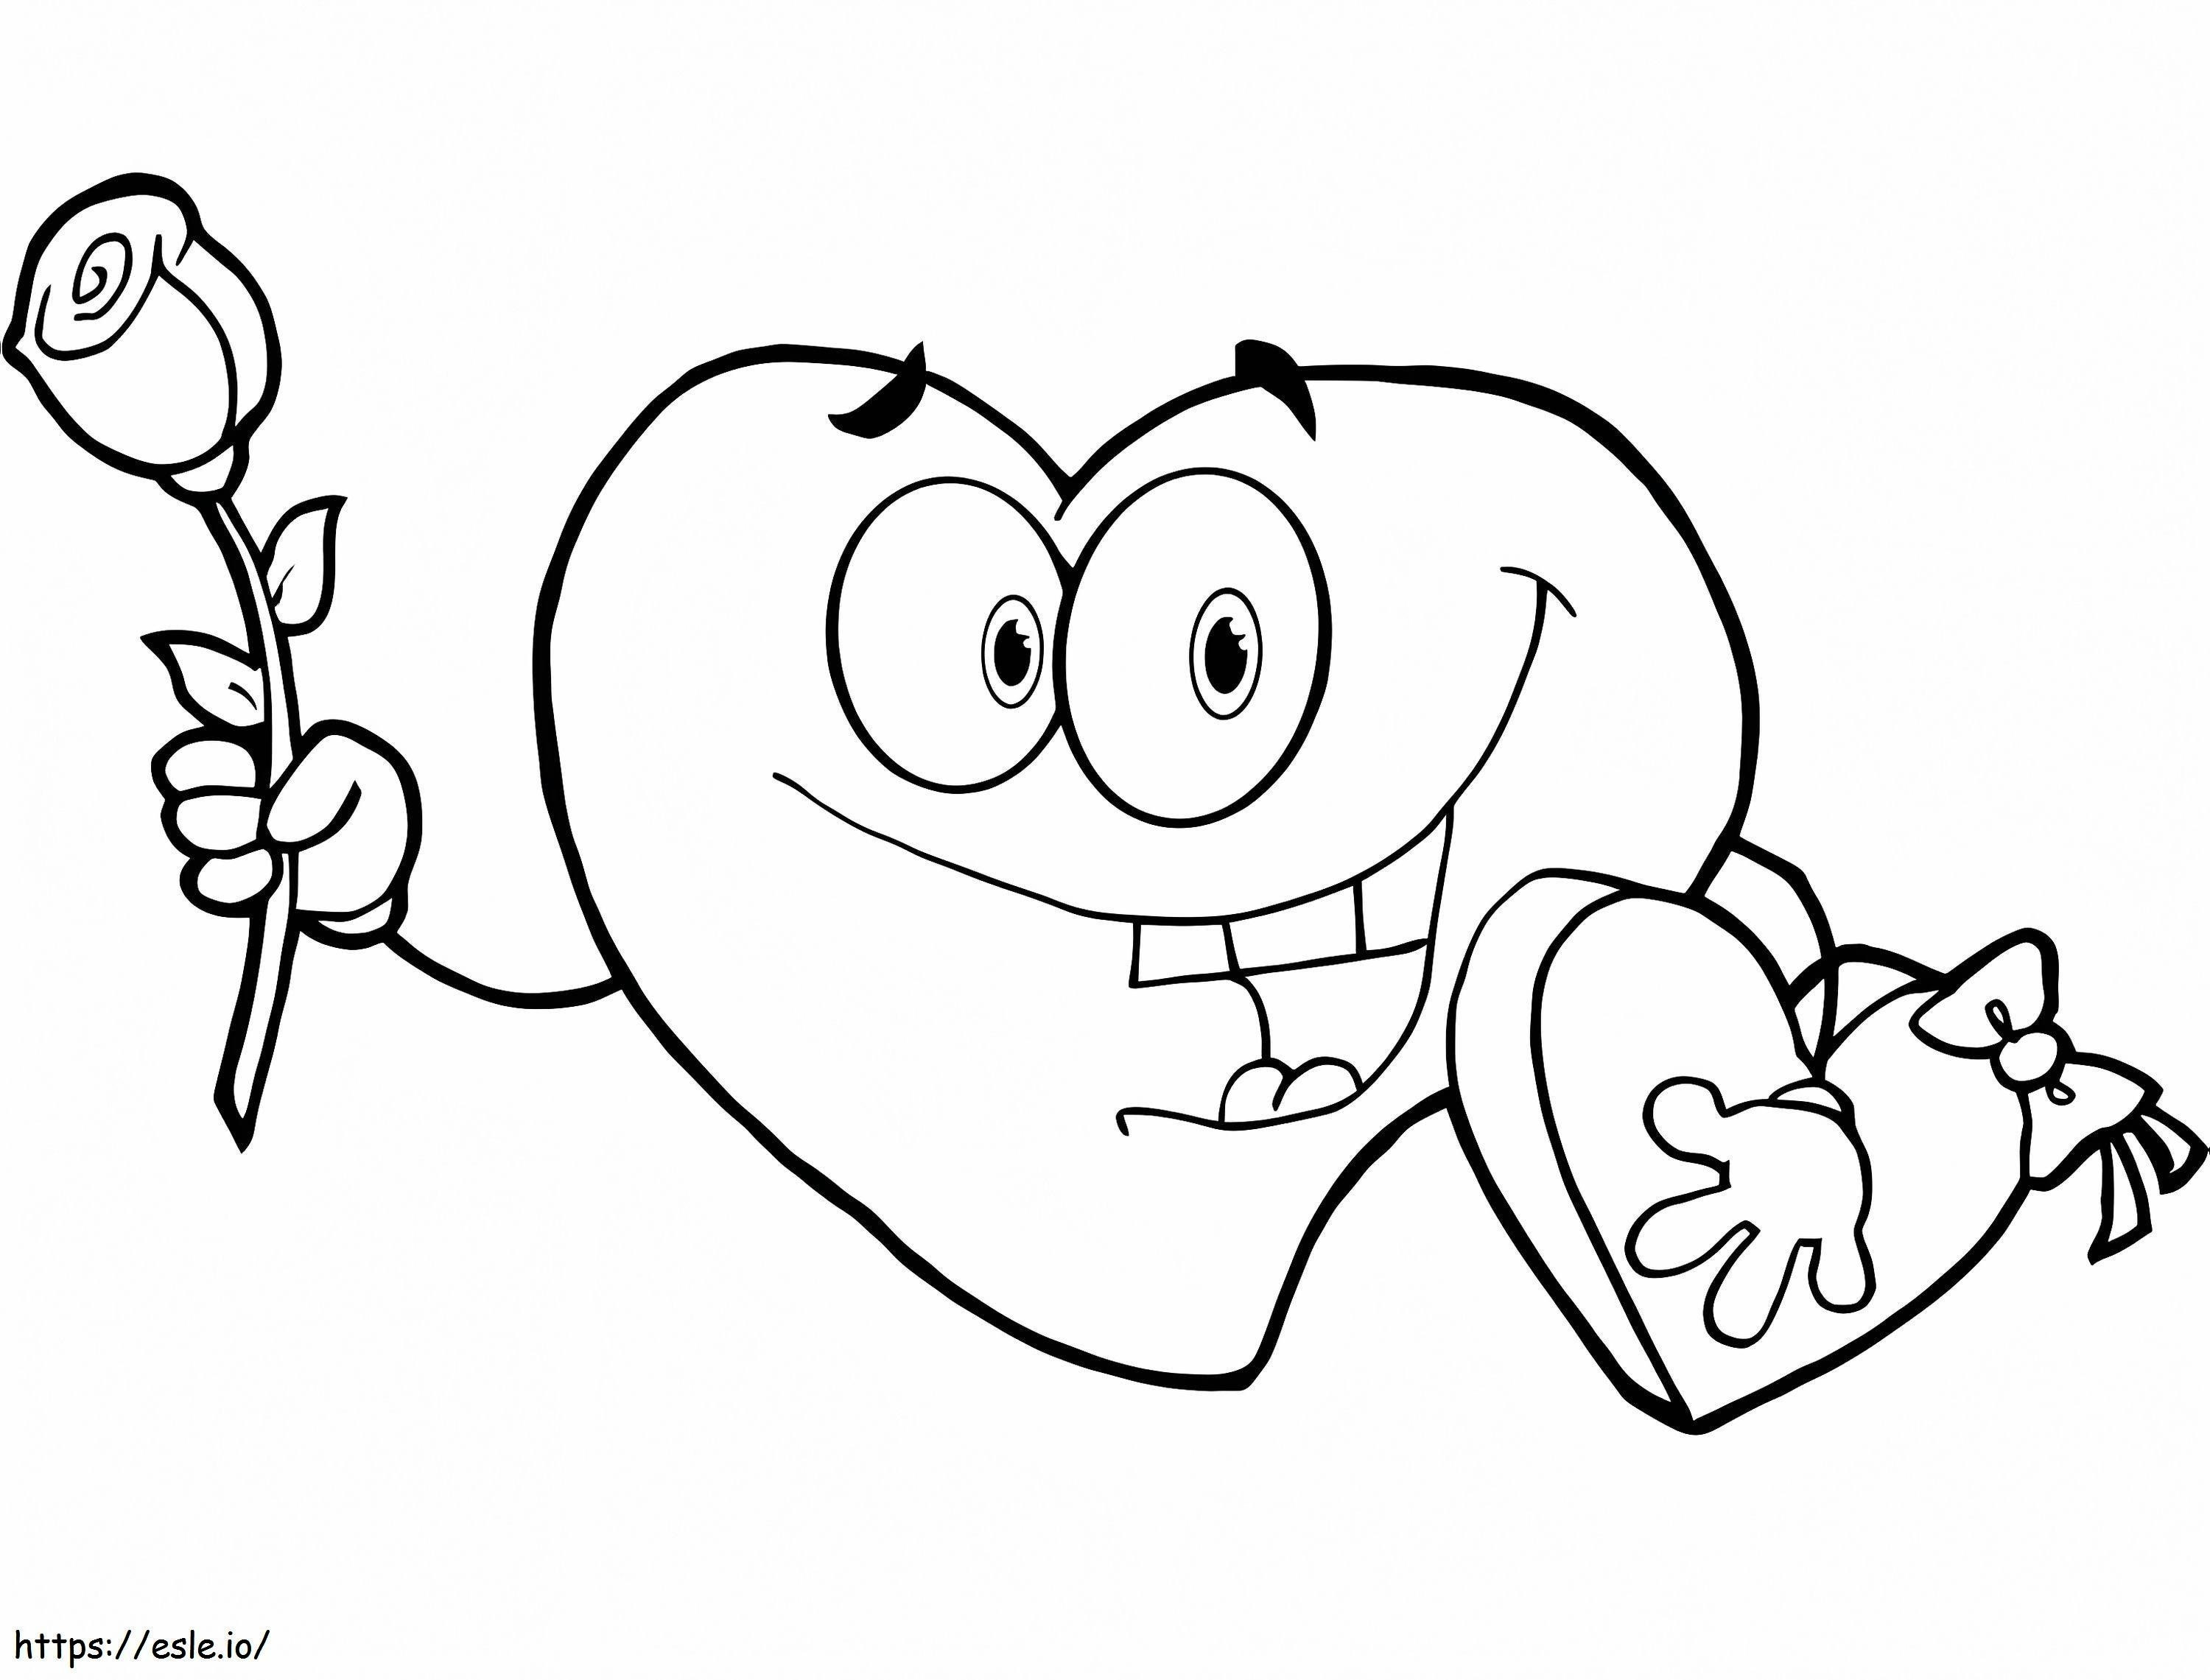 Cartoon Valentine Heart coloring page